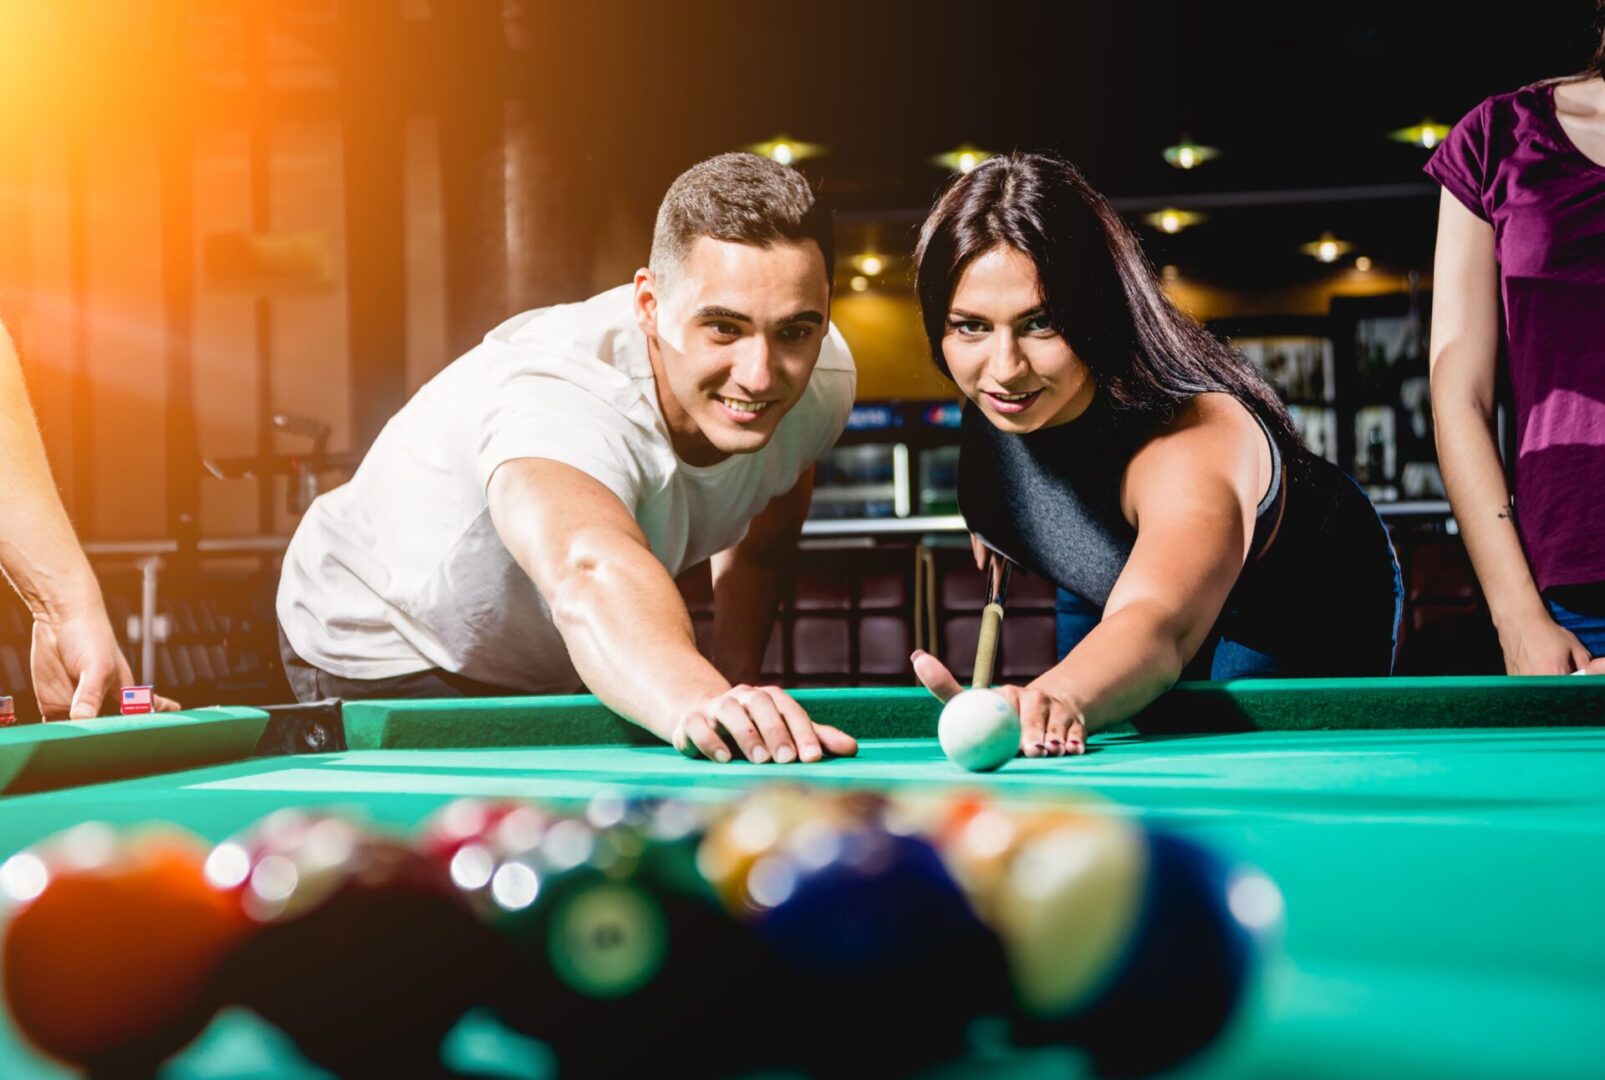 A man and woman playing pool together.